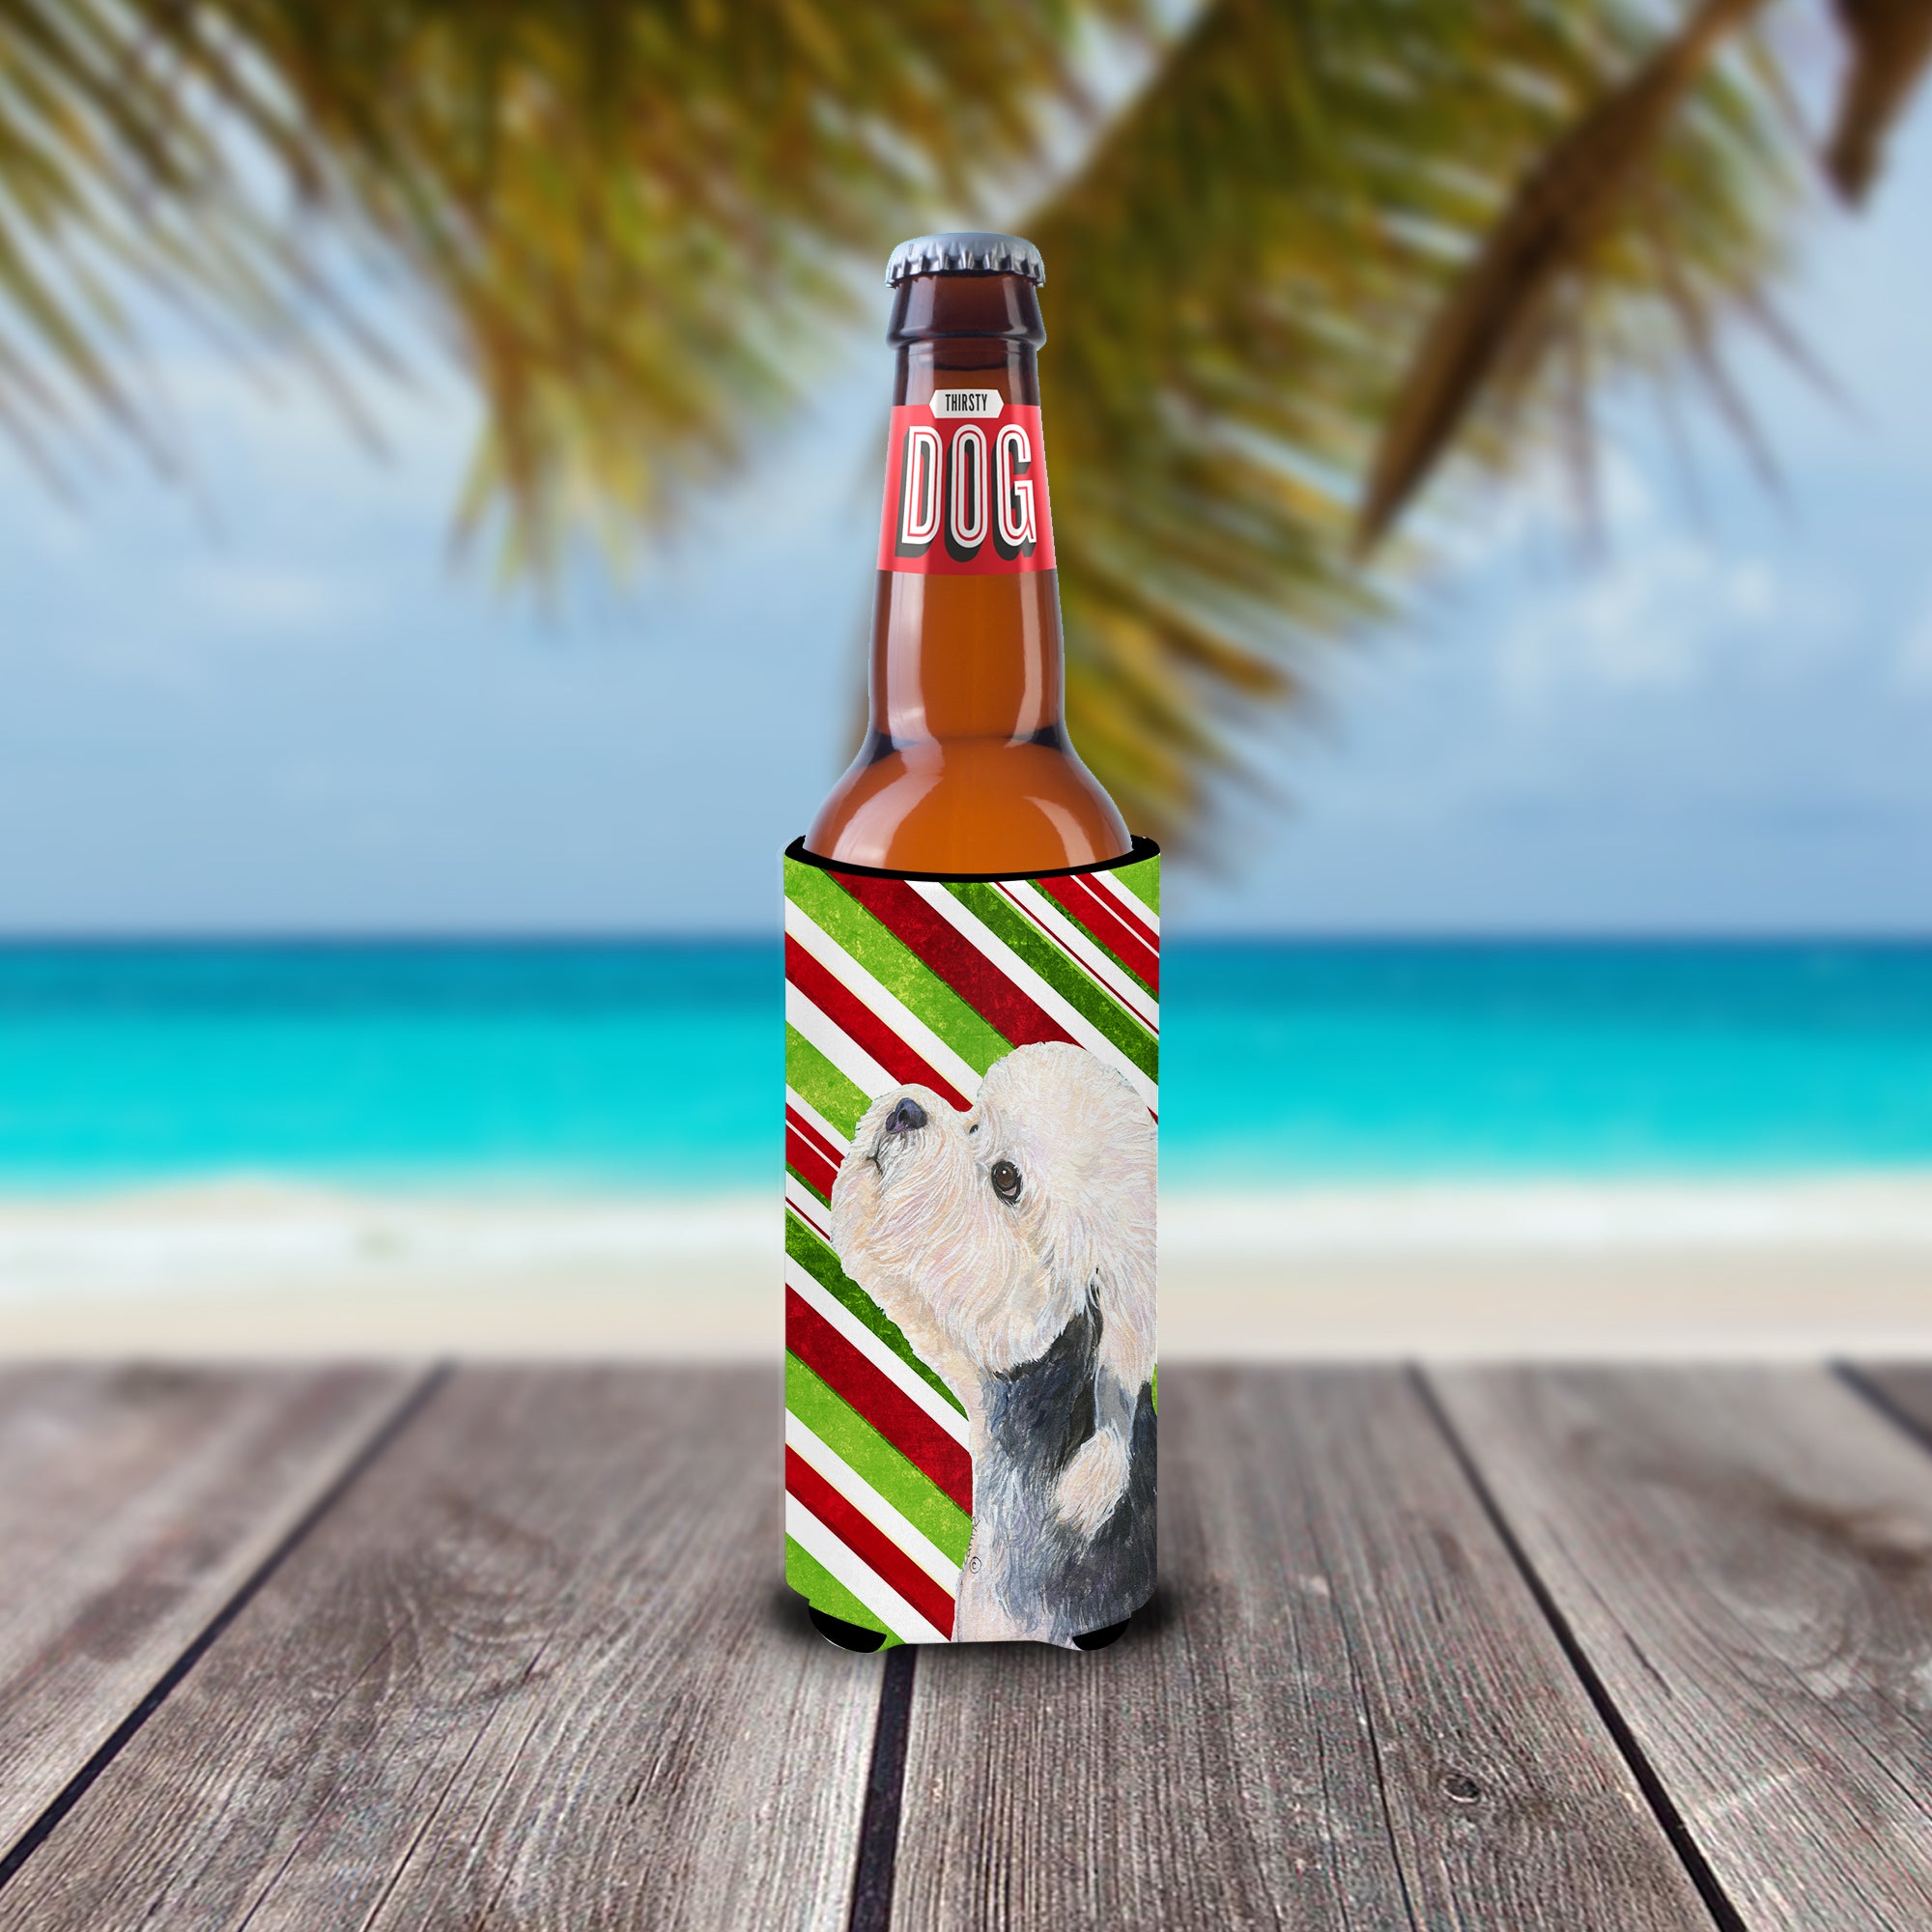 Dandie Dinmont Terrier Candy Cane Holiday Christmas Ultra Beverage Isolateurs pour canettes minces SS4572MUK